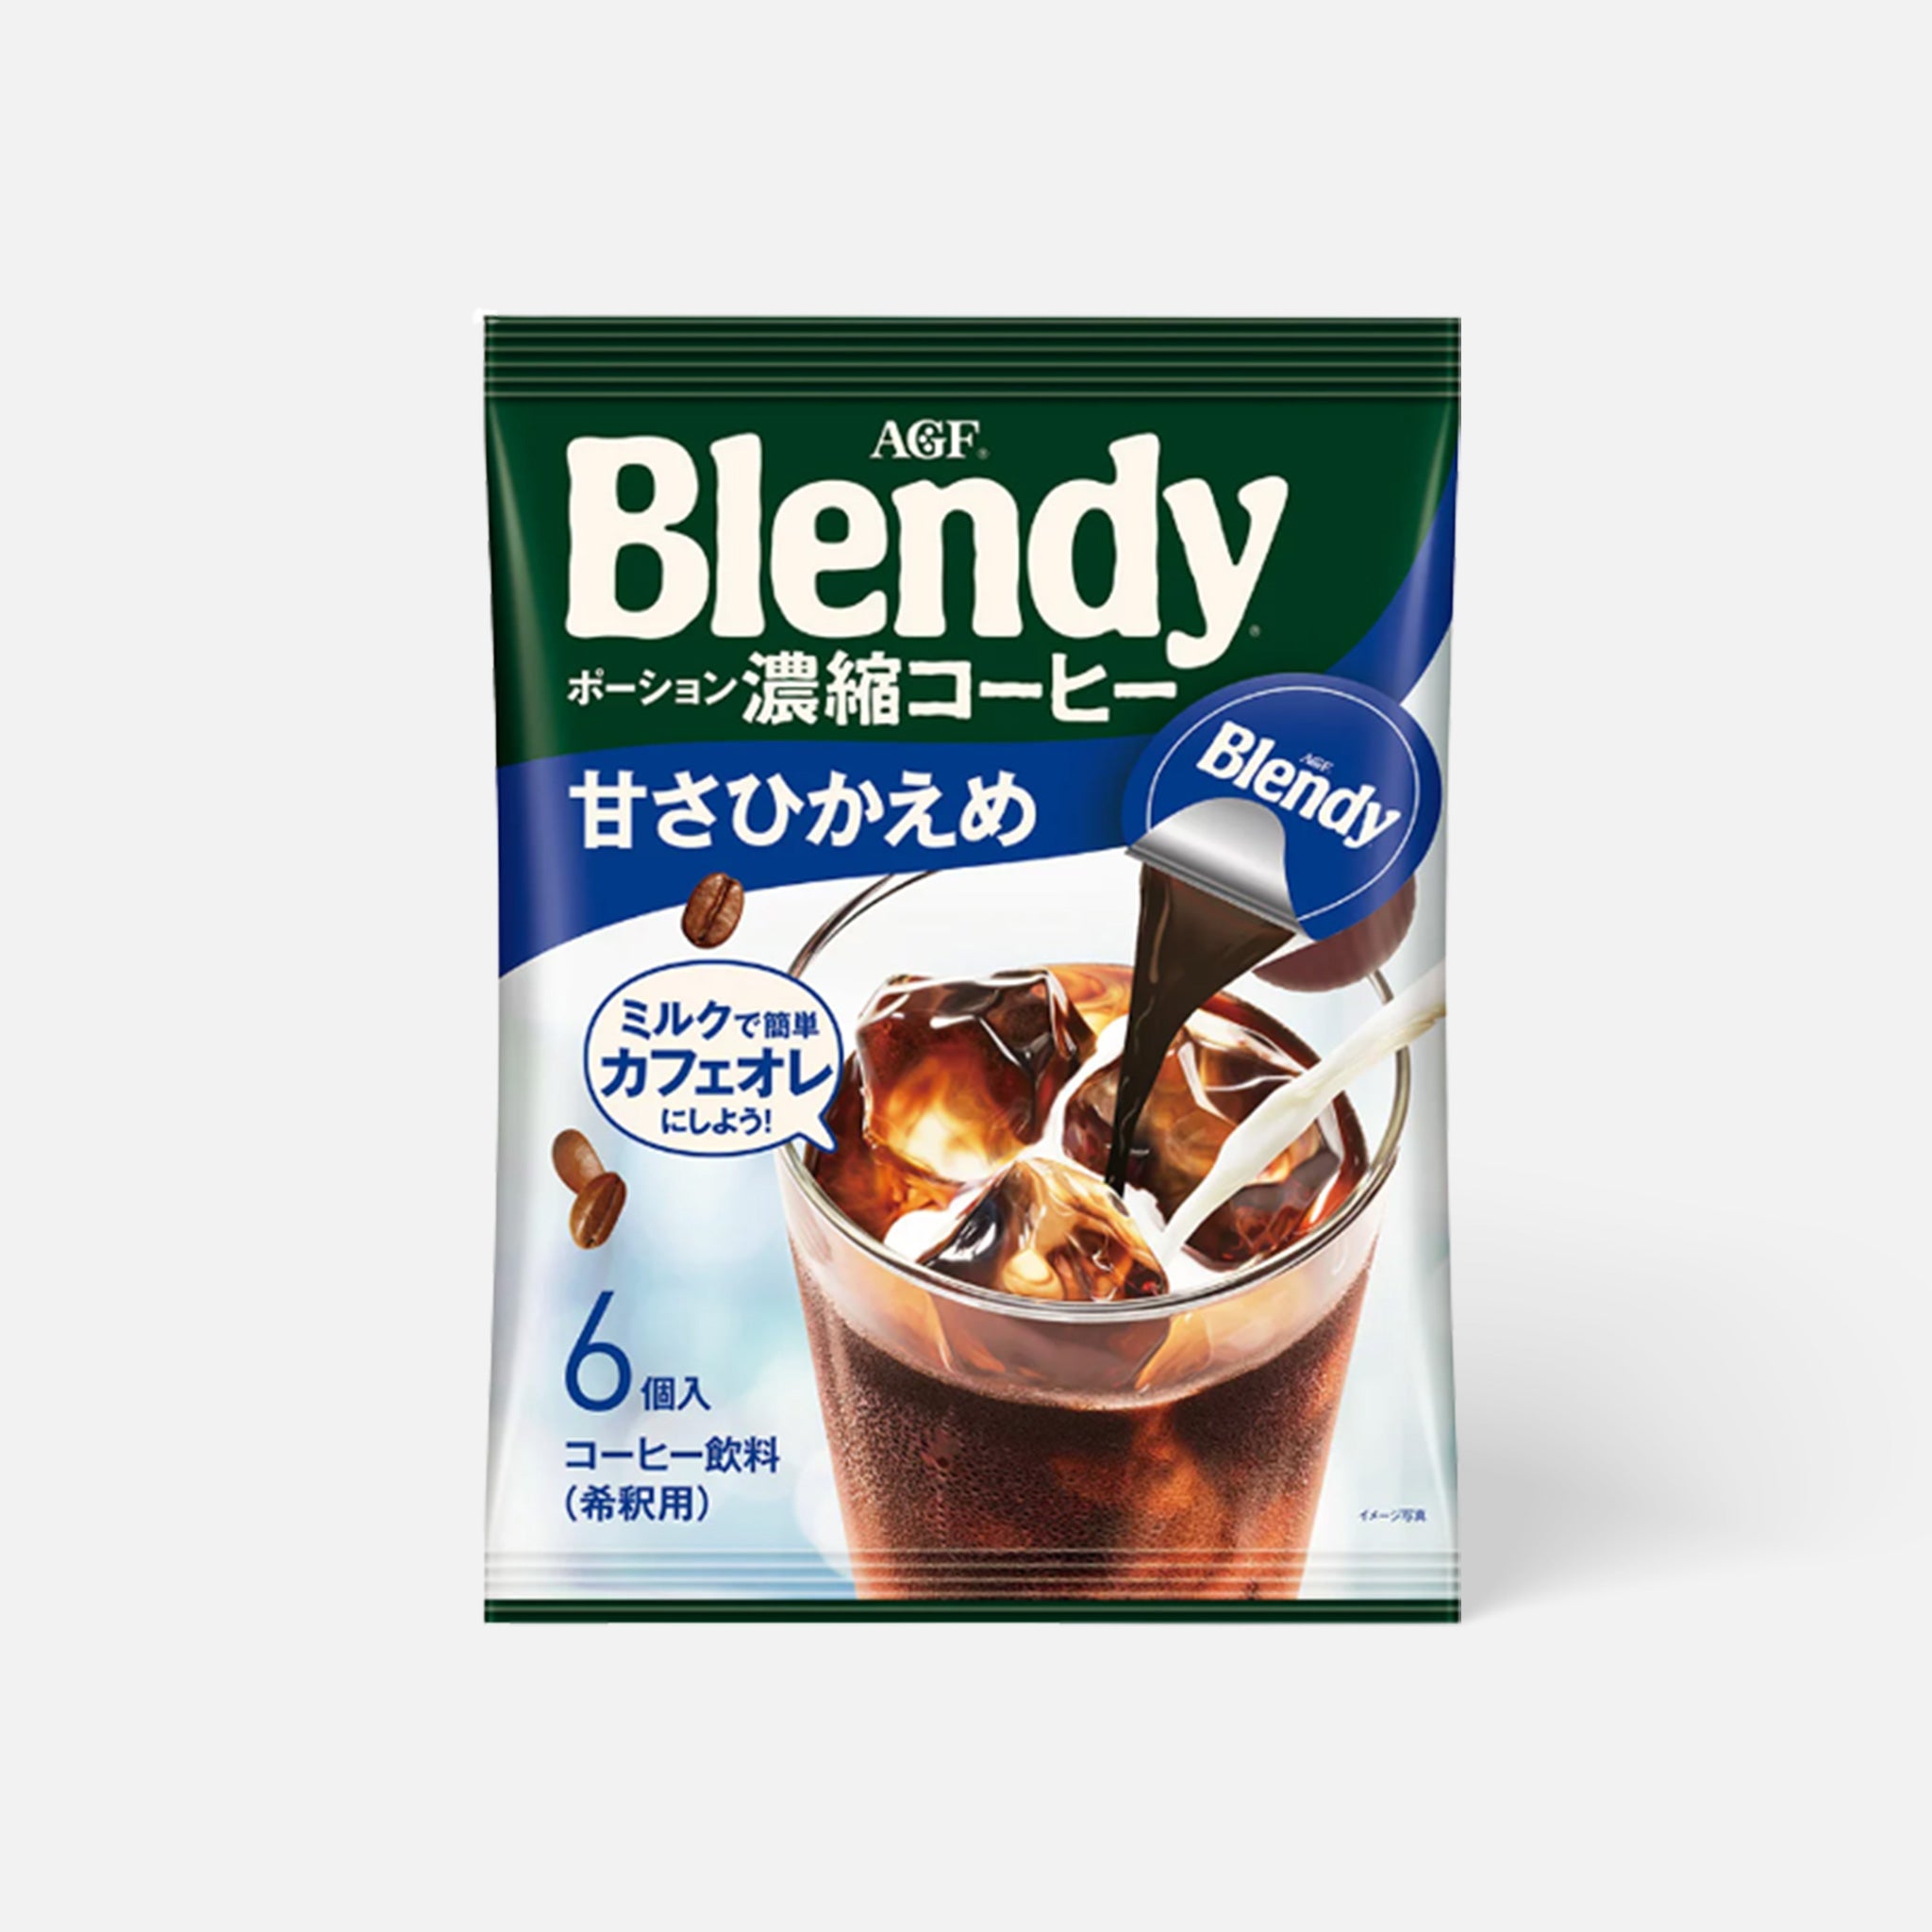 AGF Blendy Portion Concentrated Coffee Less Sugar 6pcs